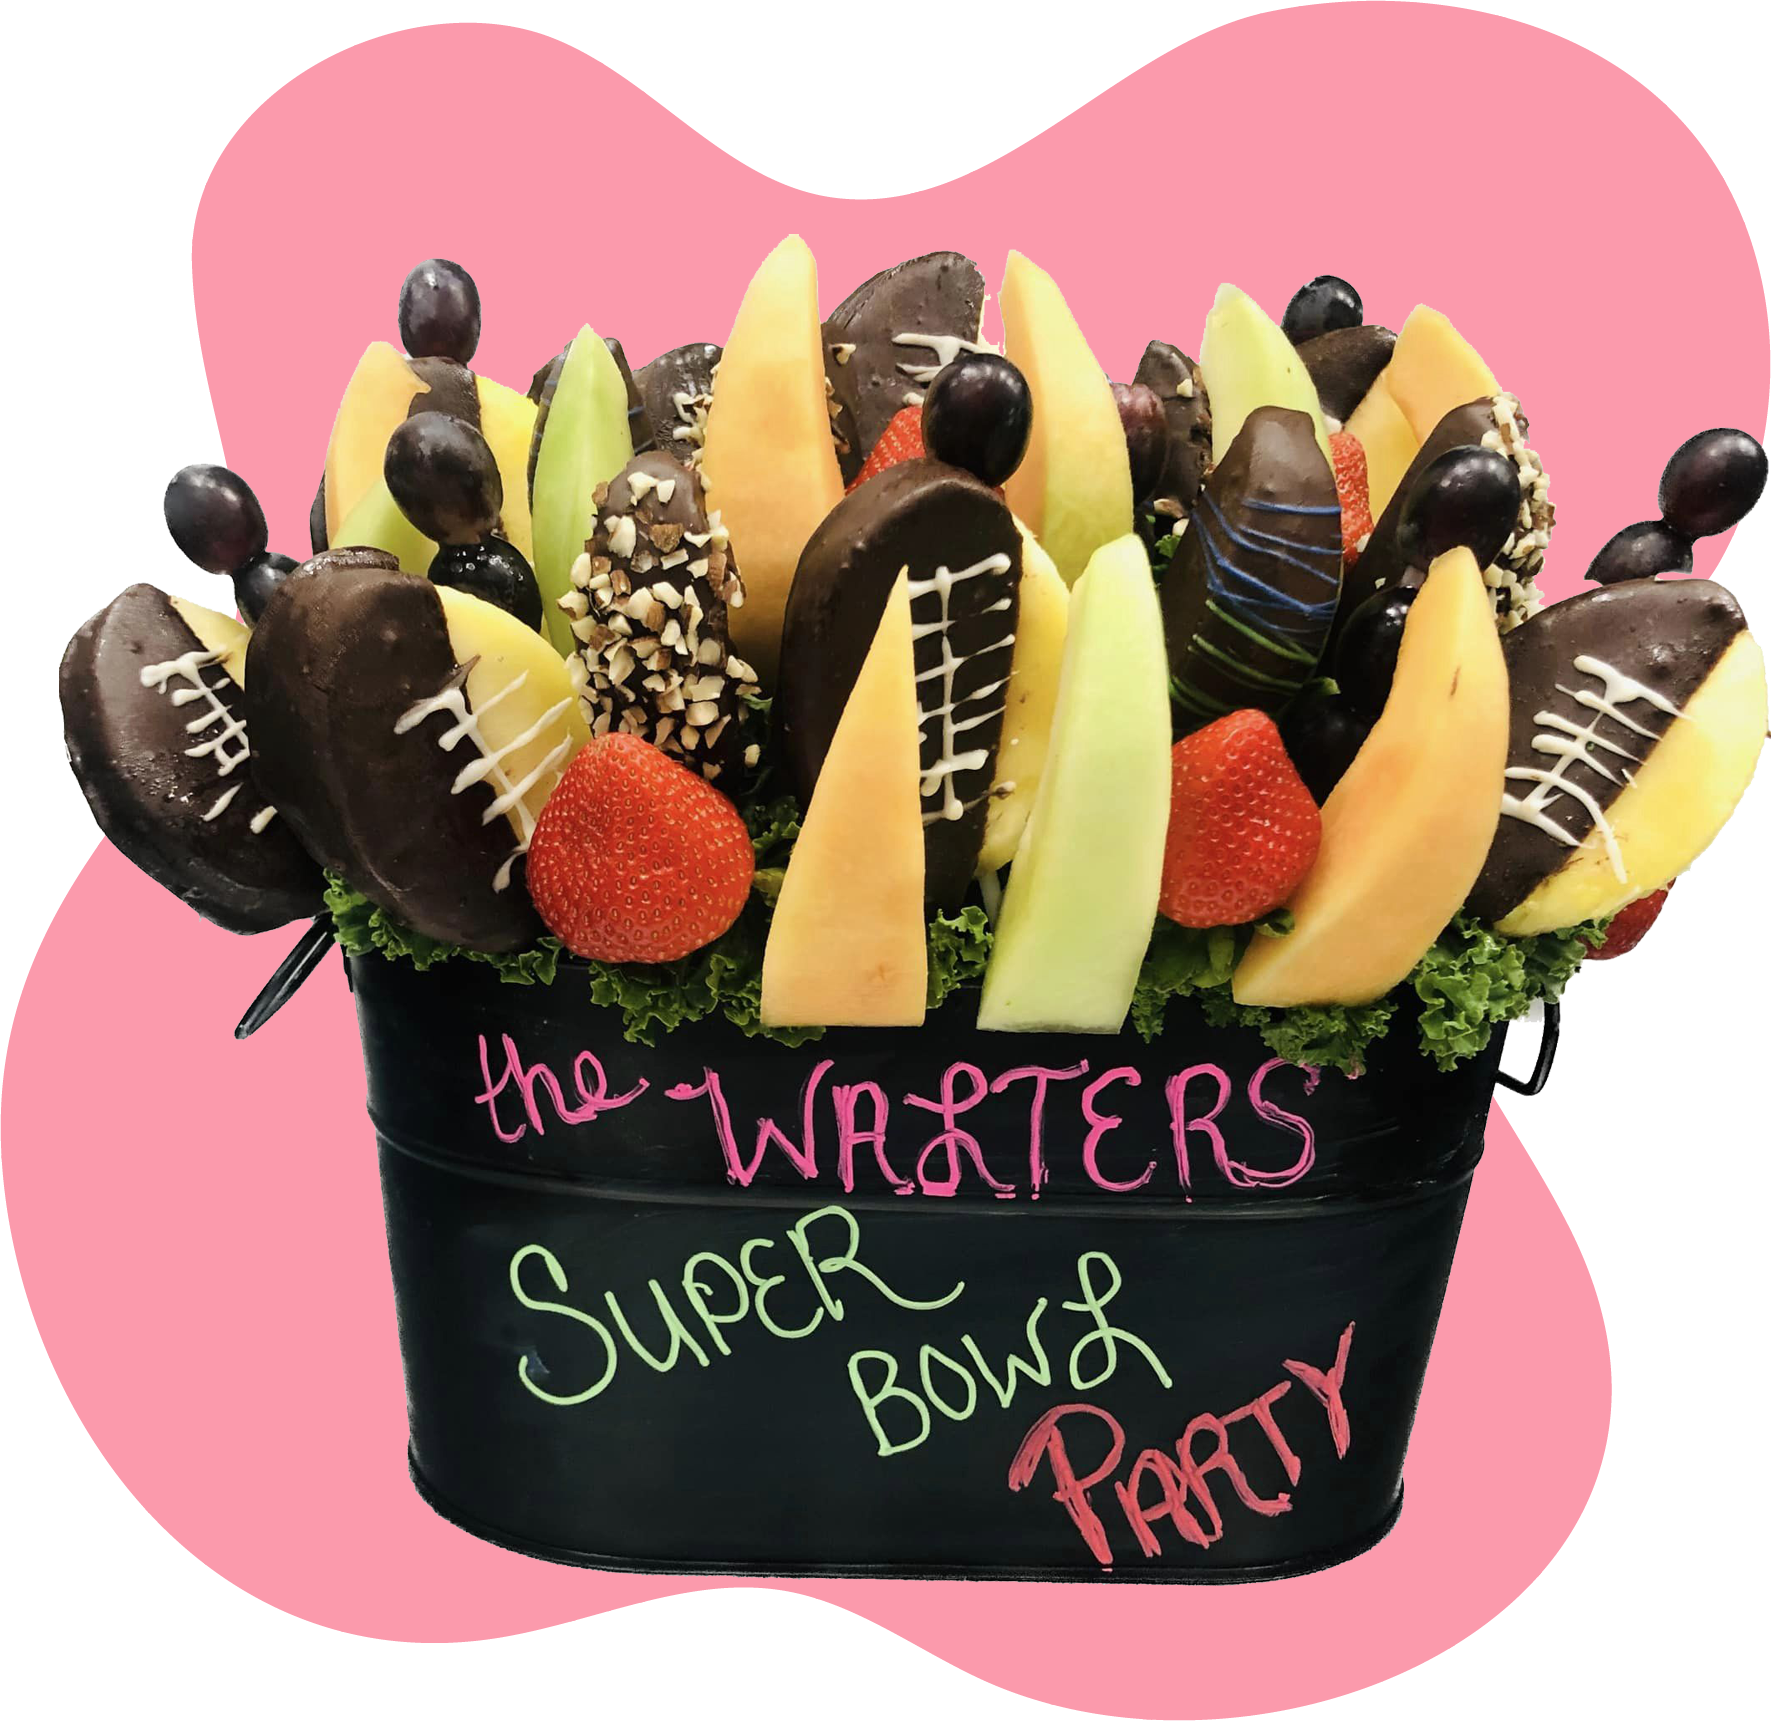 A bouquet of fruit in a bucket that says super bowl party